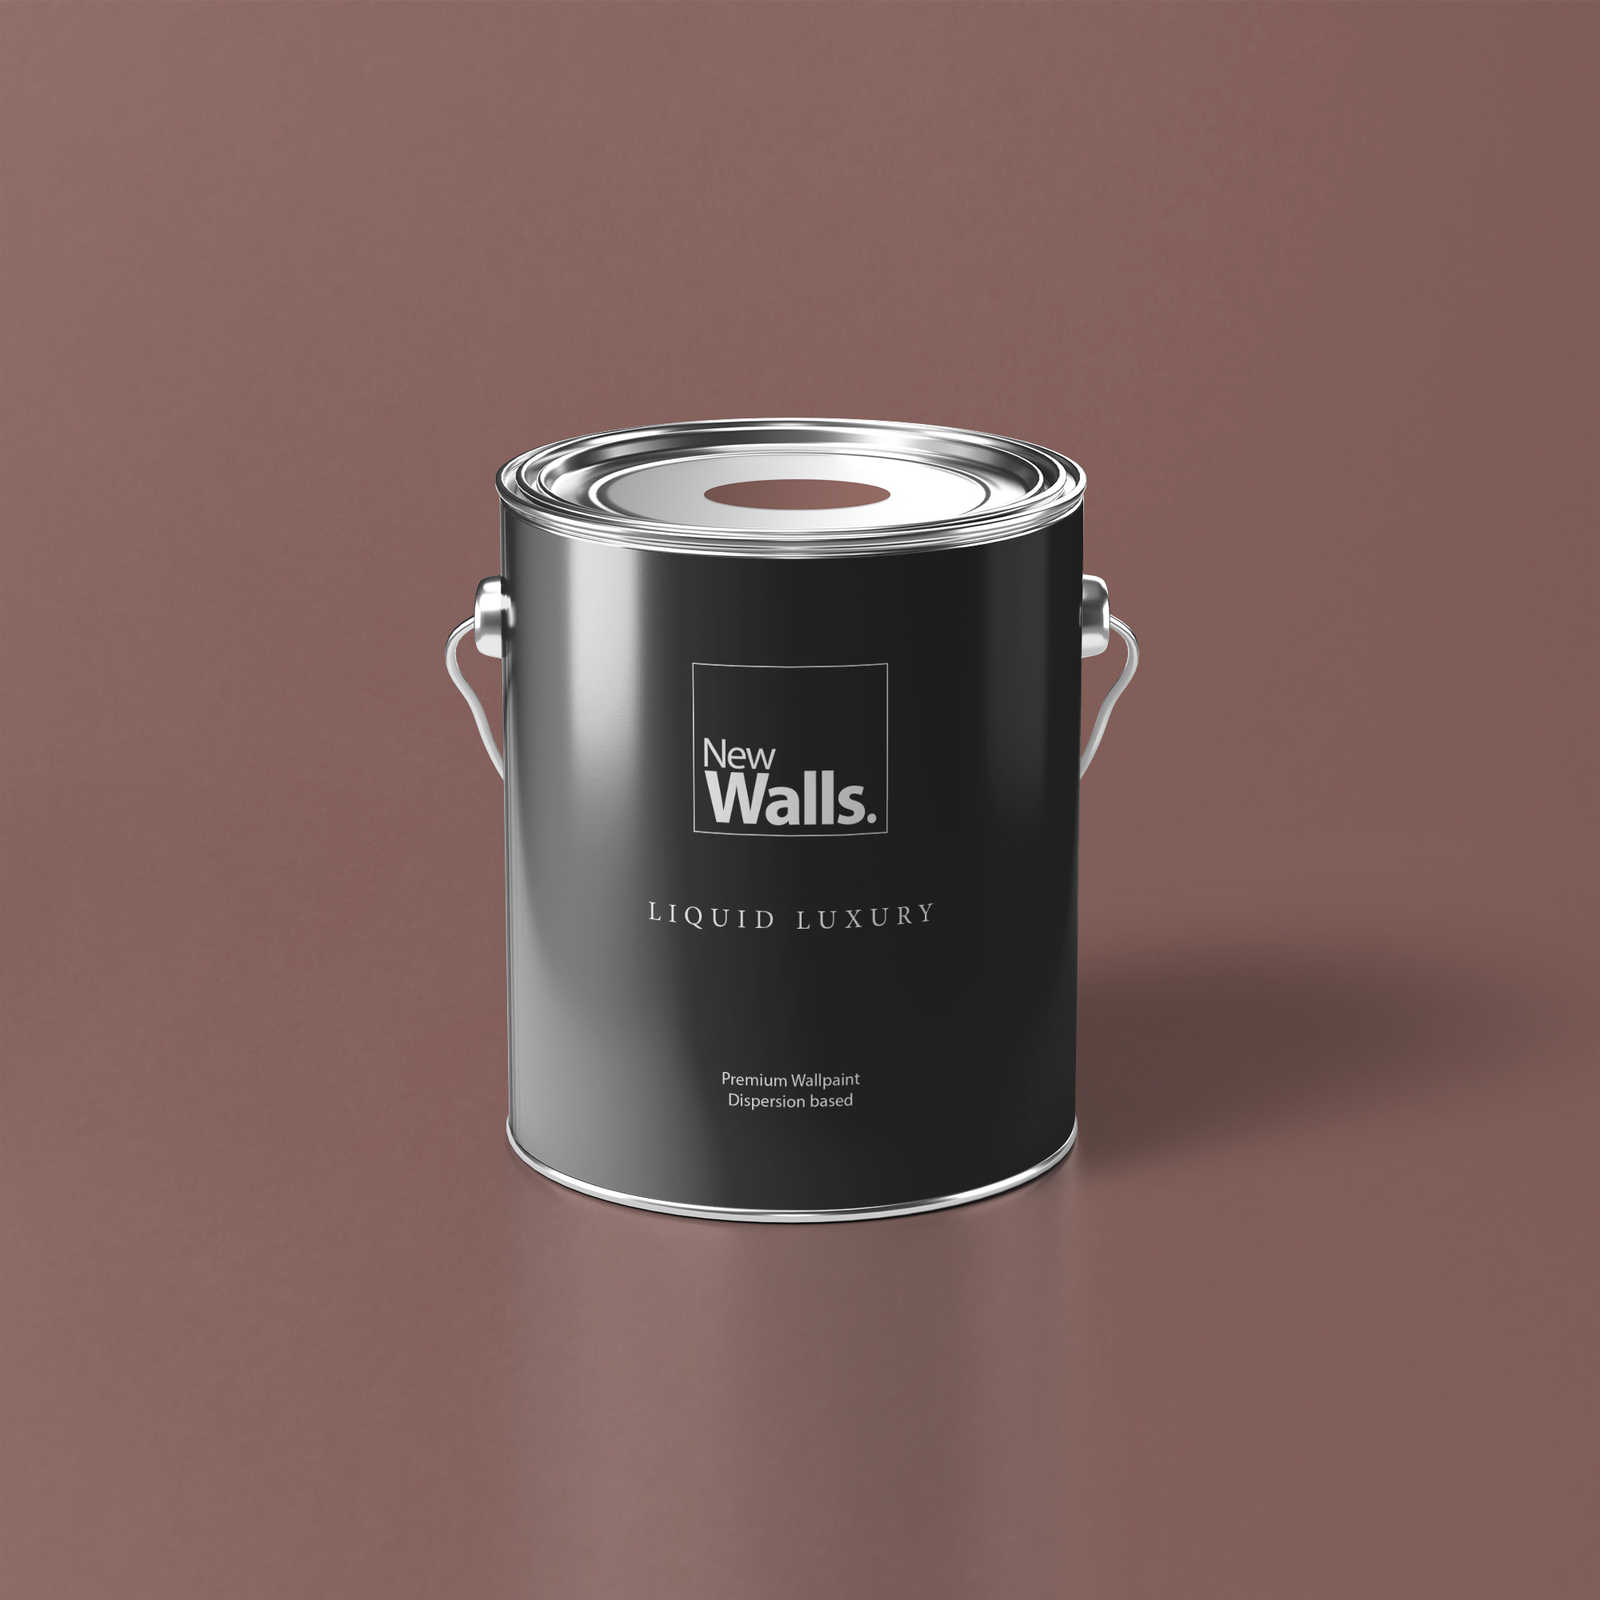 Premium Wall Paint Nature Dark Pink »Natural Nude« NW1012 – 5 litre
